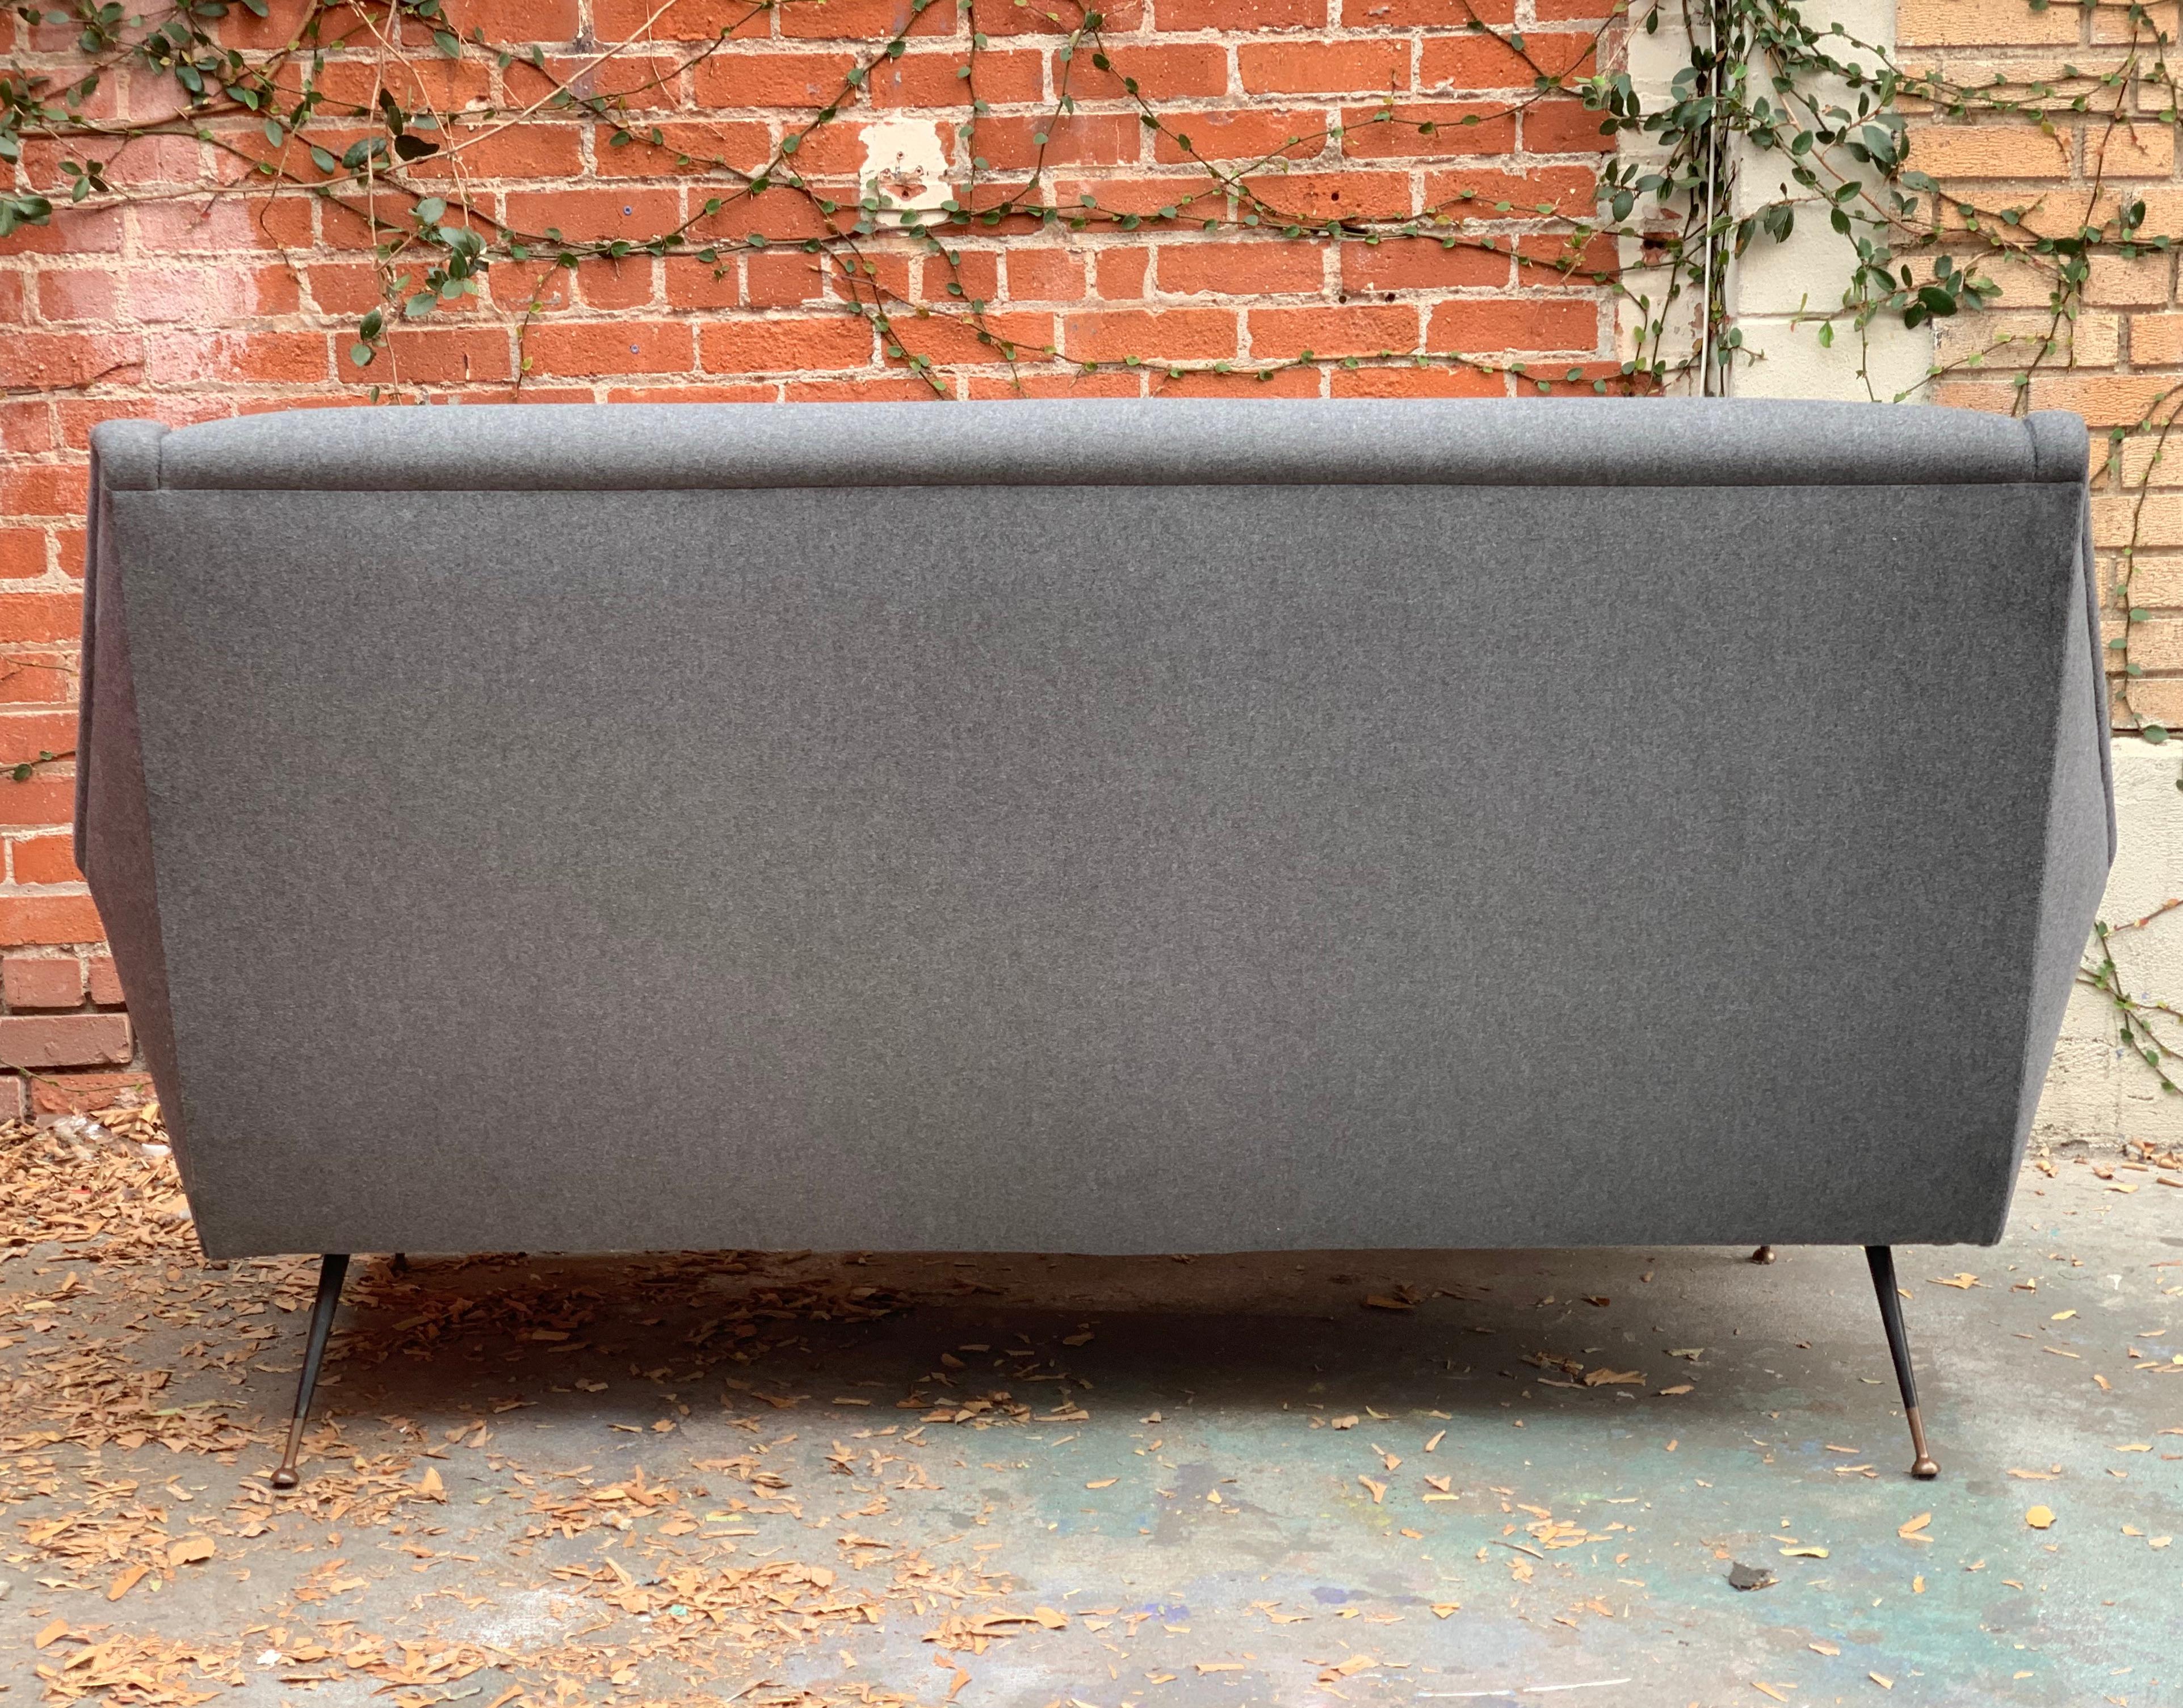 Impeccably restored Italian midcentury tufted sofa by Ico Parisi in new Grey Flannel.
Matching pair of chairs available.